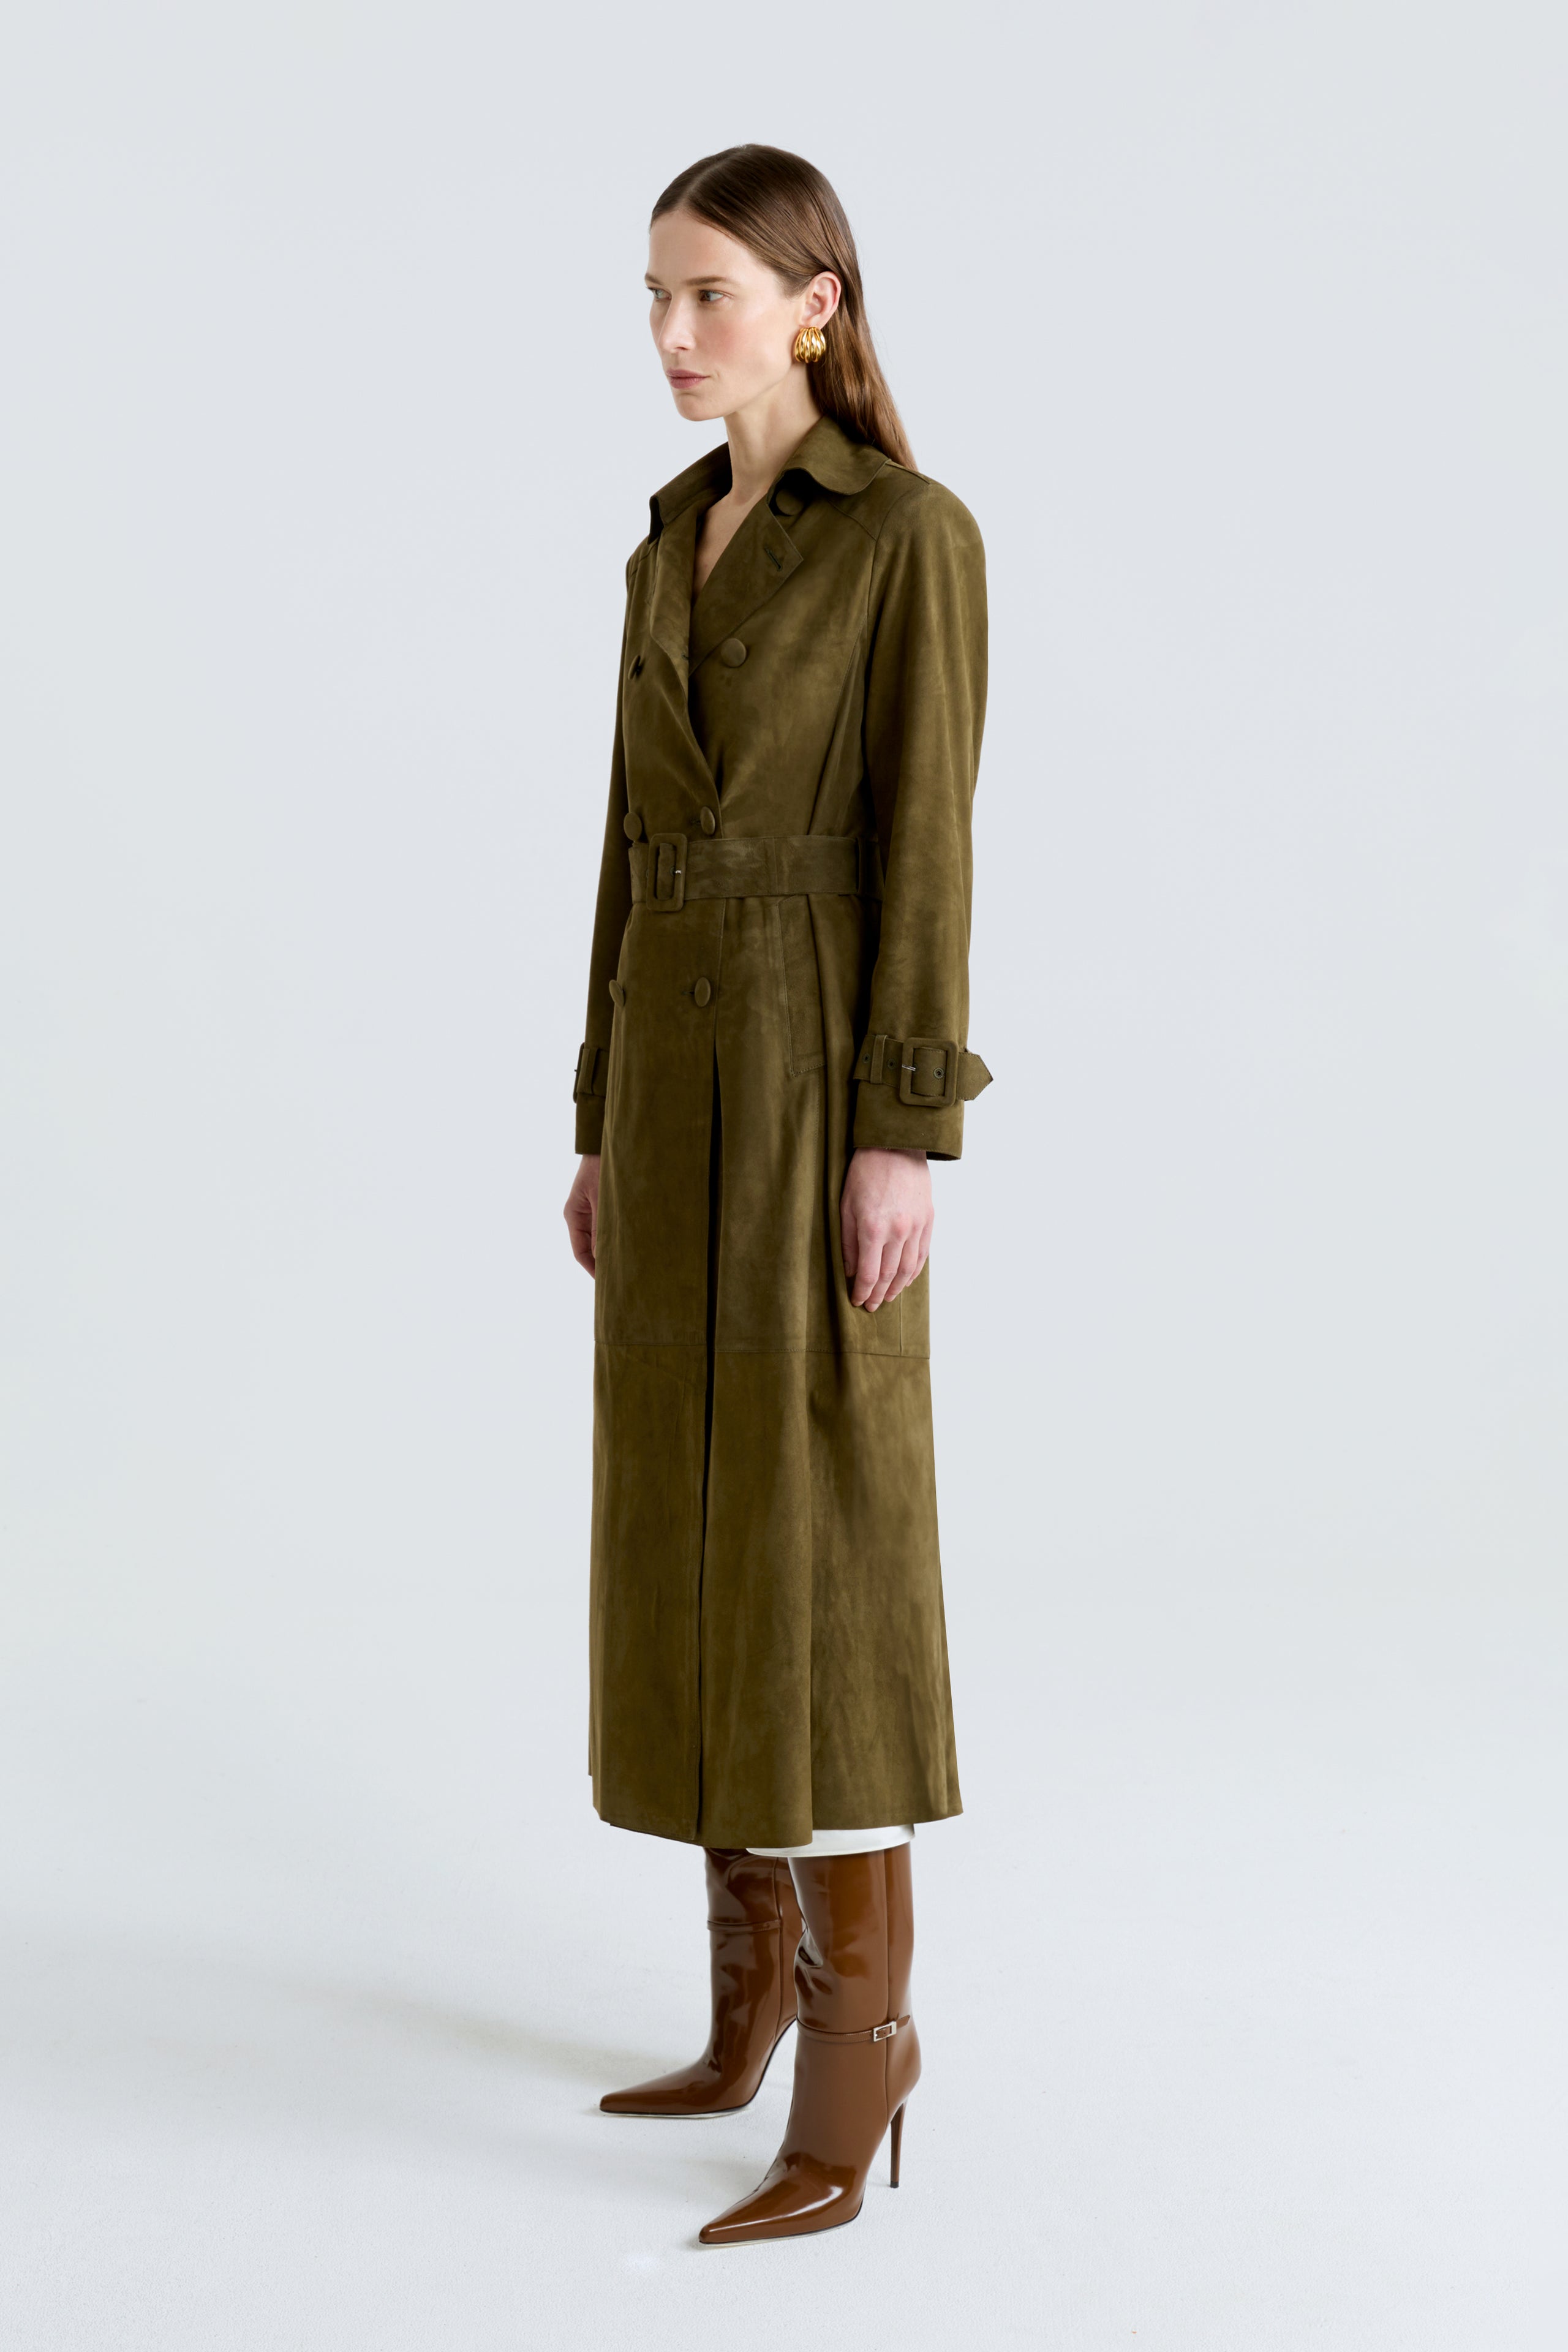 Model is wearing the Tate Olive Everyday Suede Trench Side